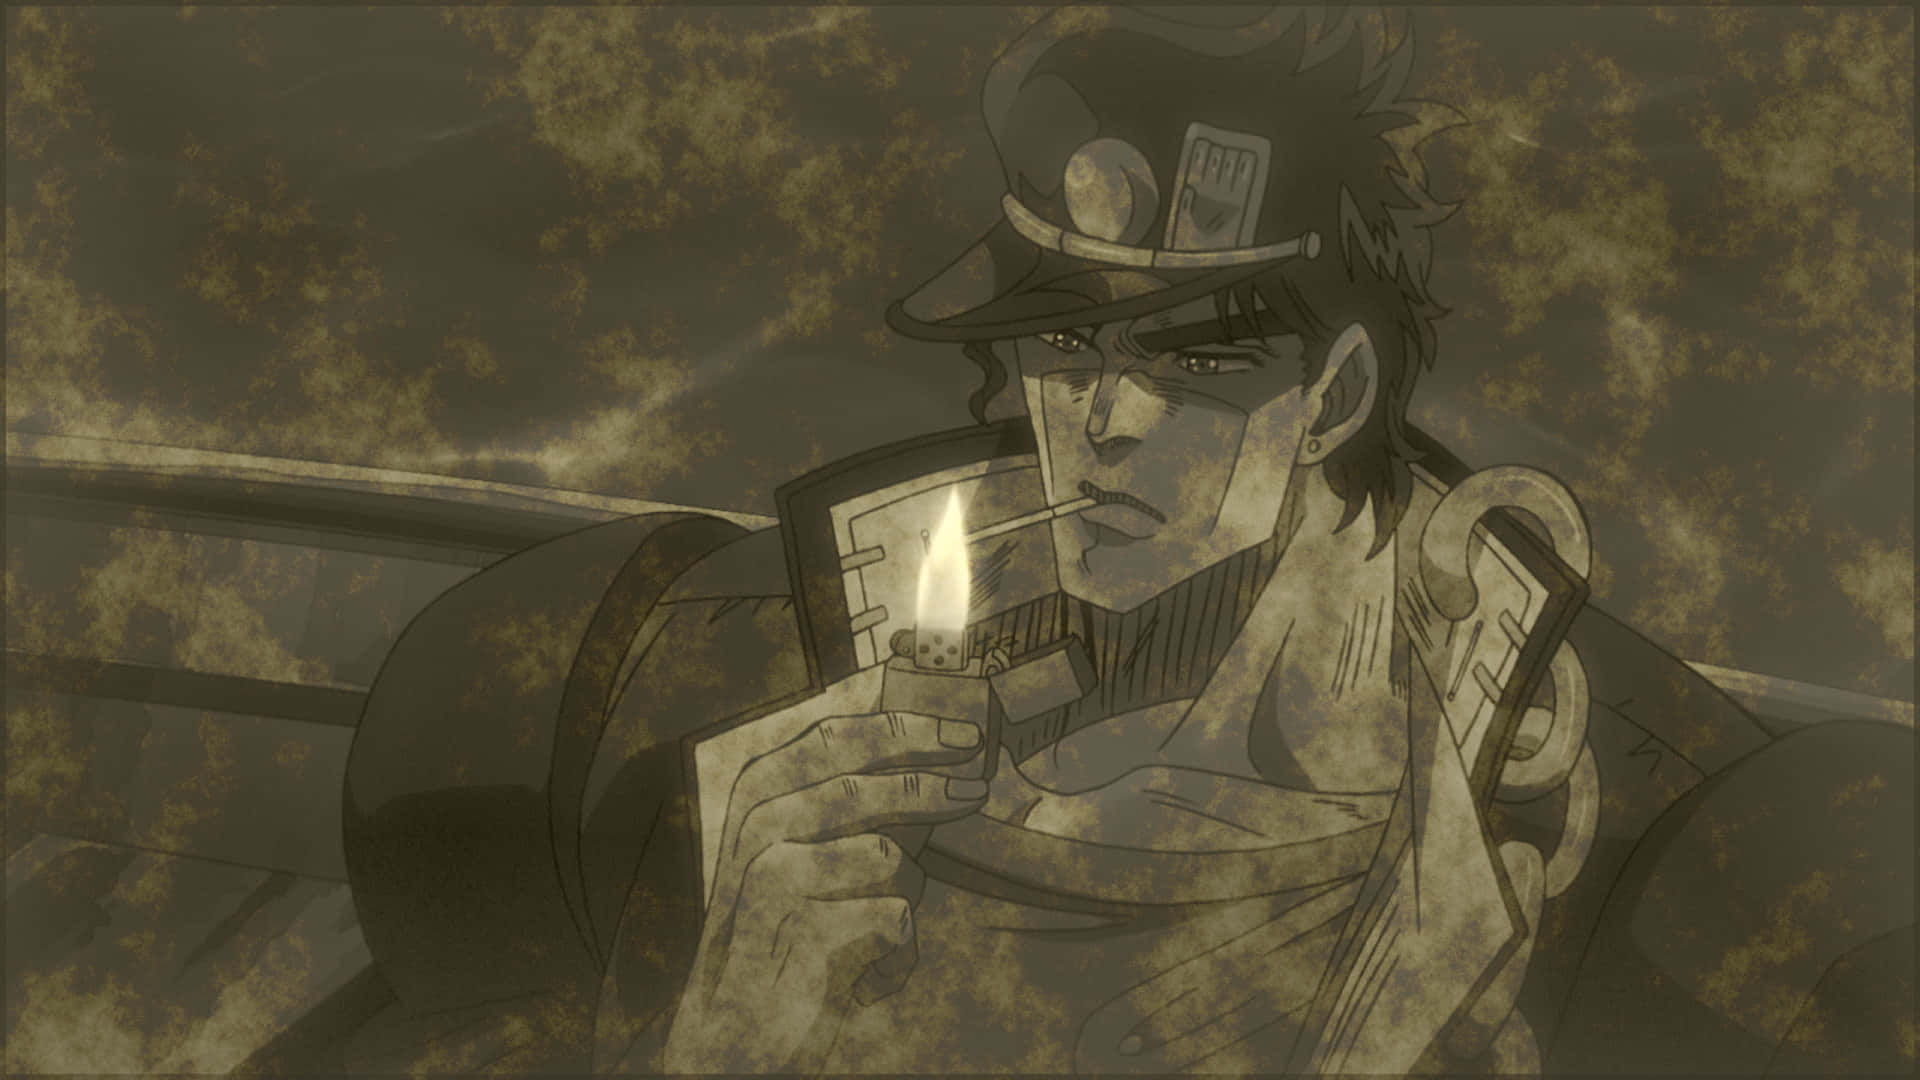 Jotaro Kujo standing tall with gritted determination Wallpaper